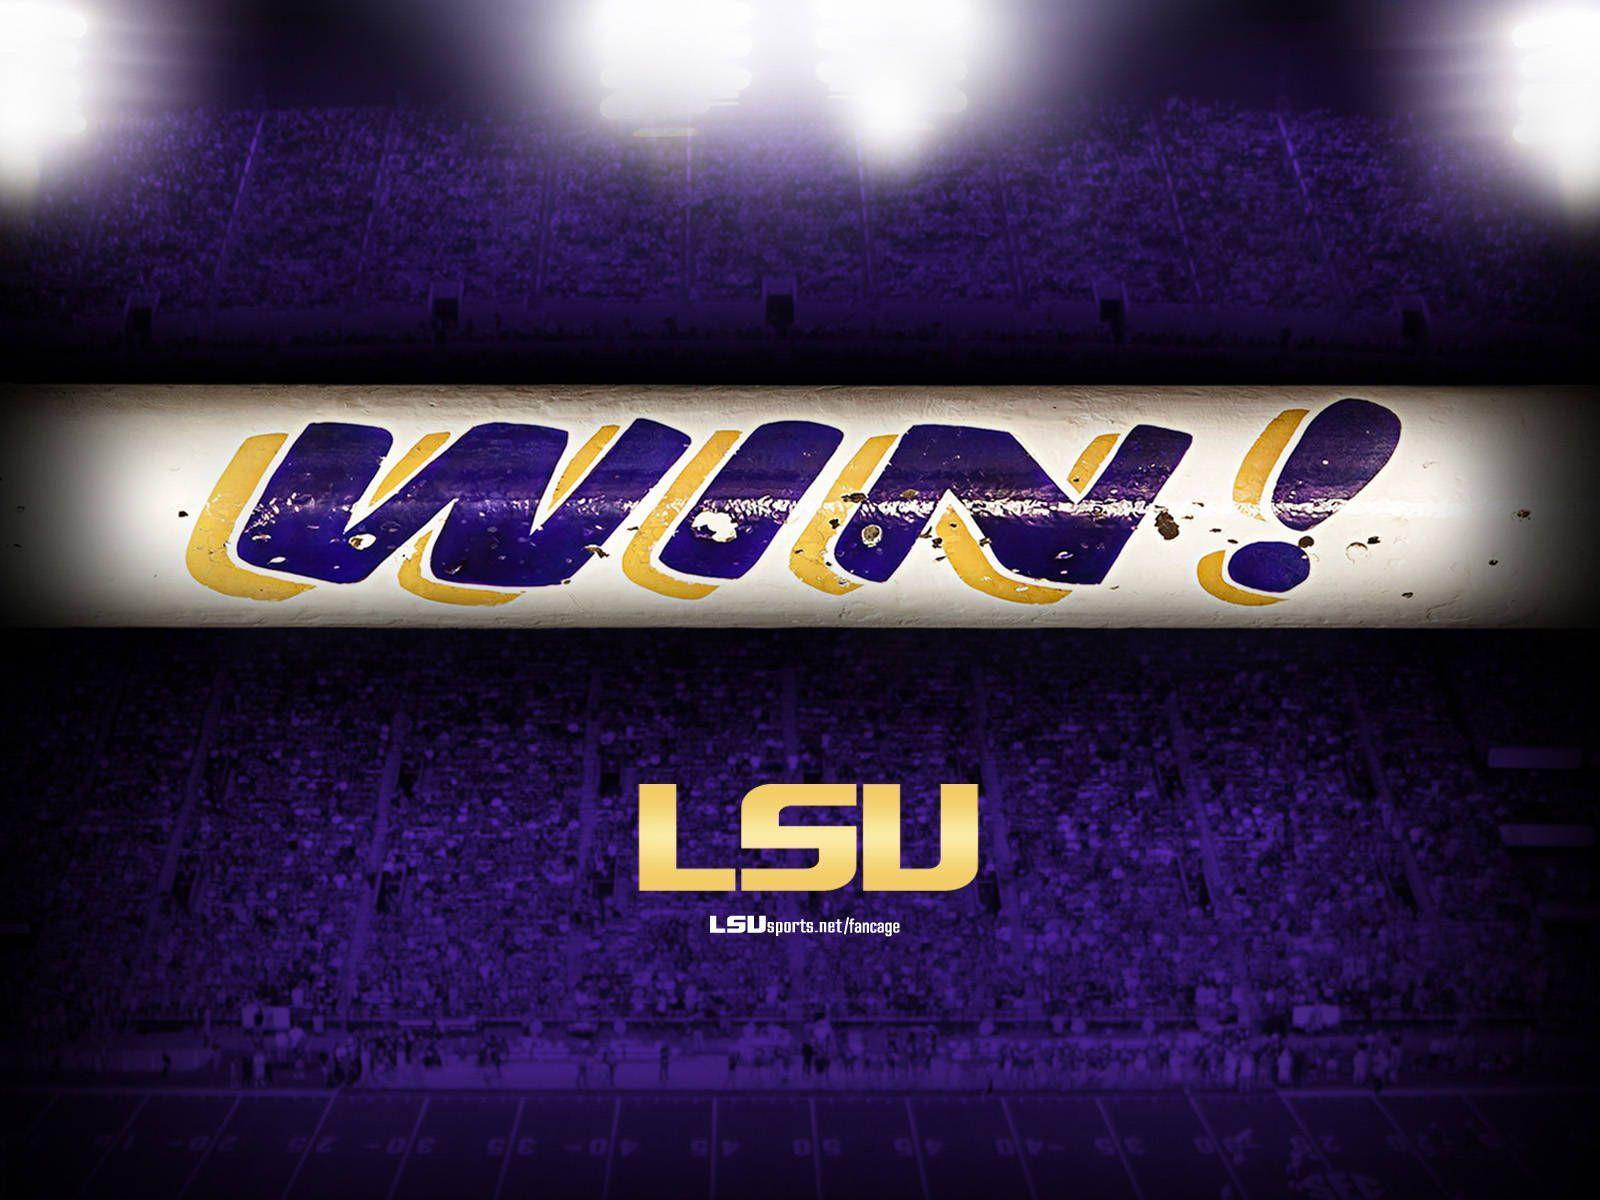 Lsu Football Wallpaper For Computer Image & Picture